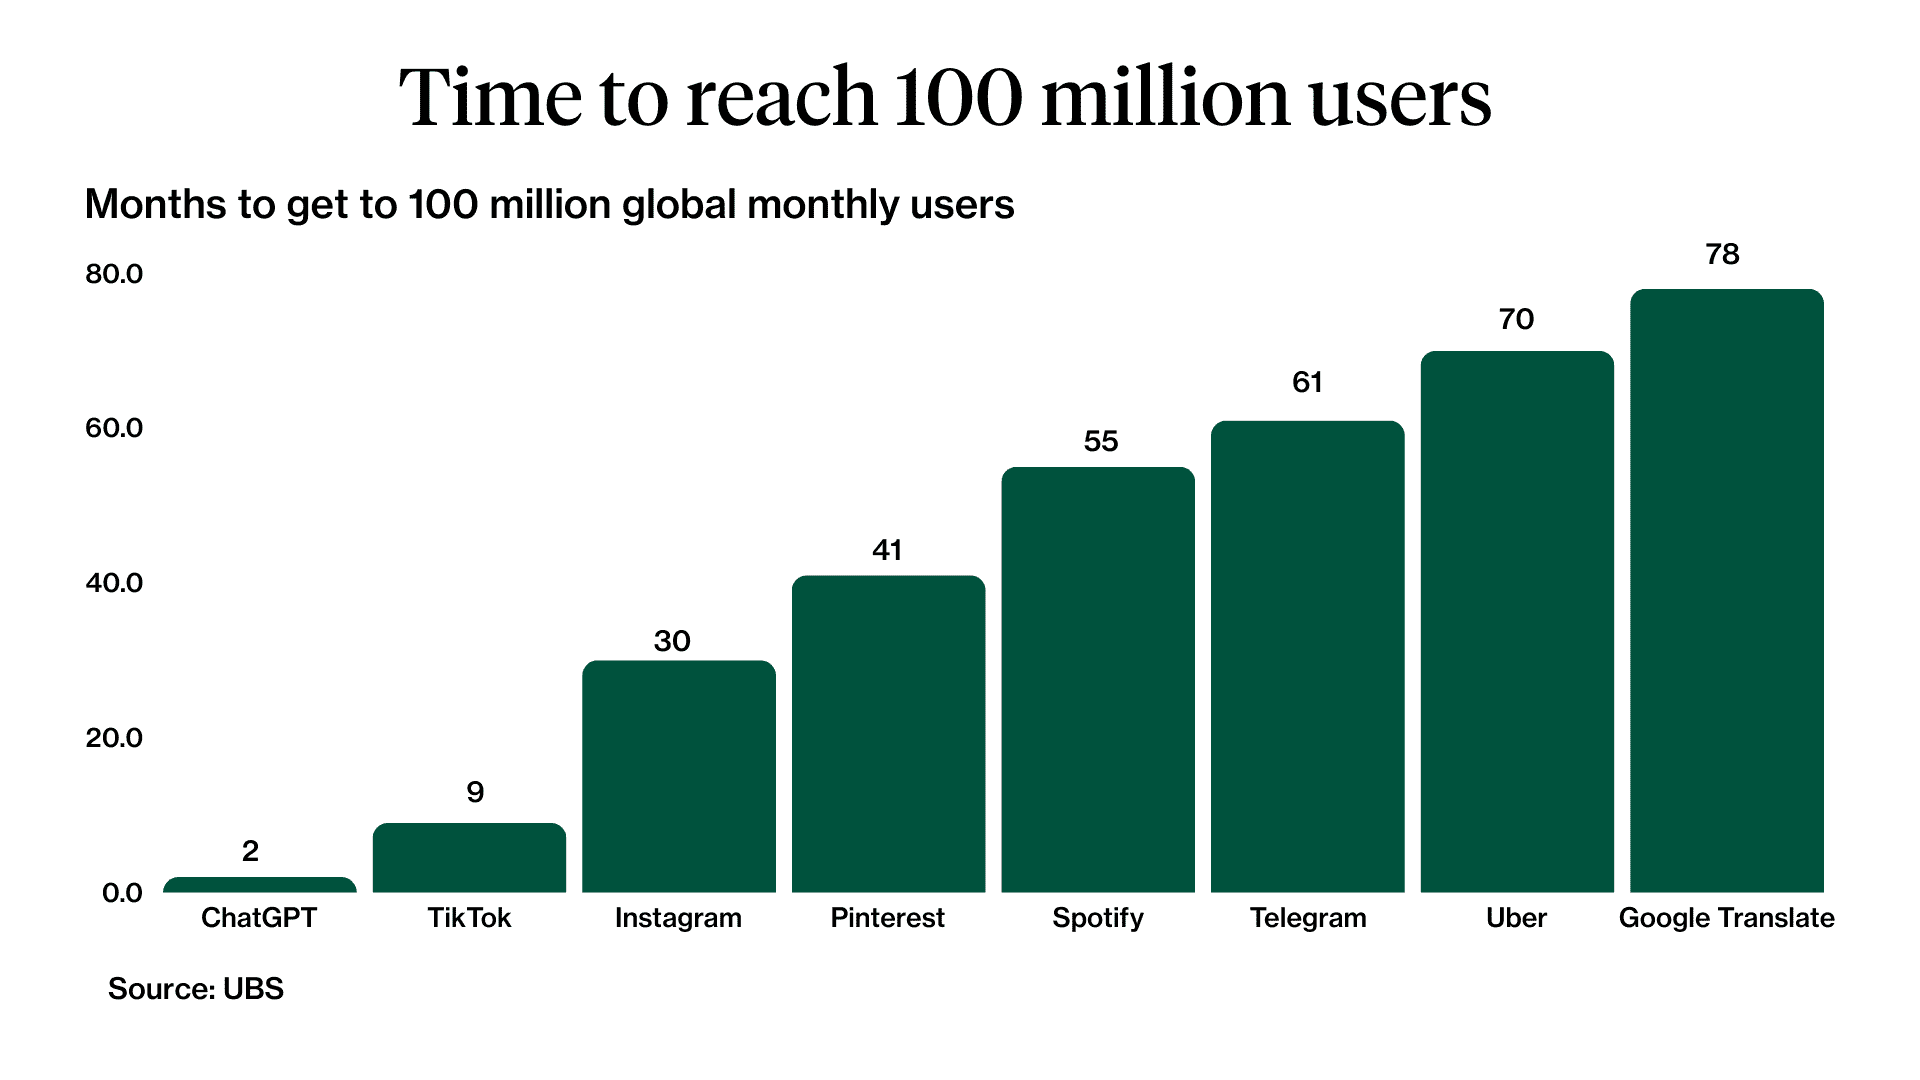 chatgpt time to reach 100 million users